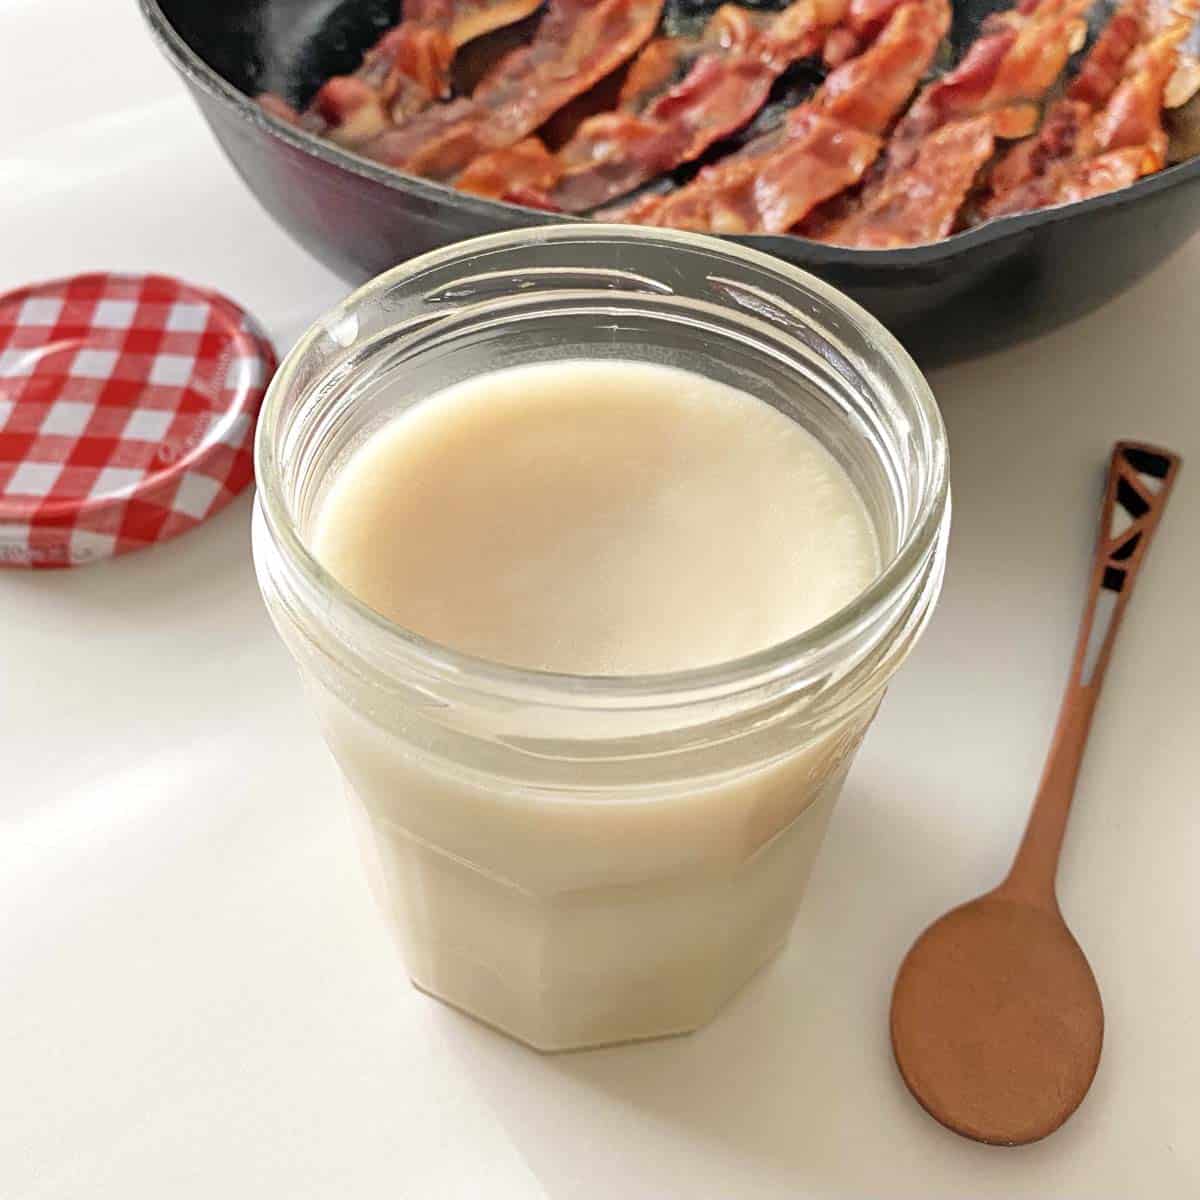 How to easily clairfy your bacon greae - cooking's essientail oil! #ba, bacon  grease